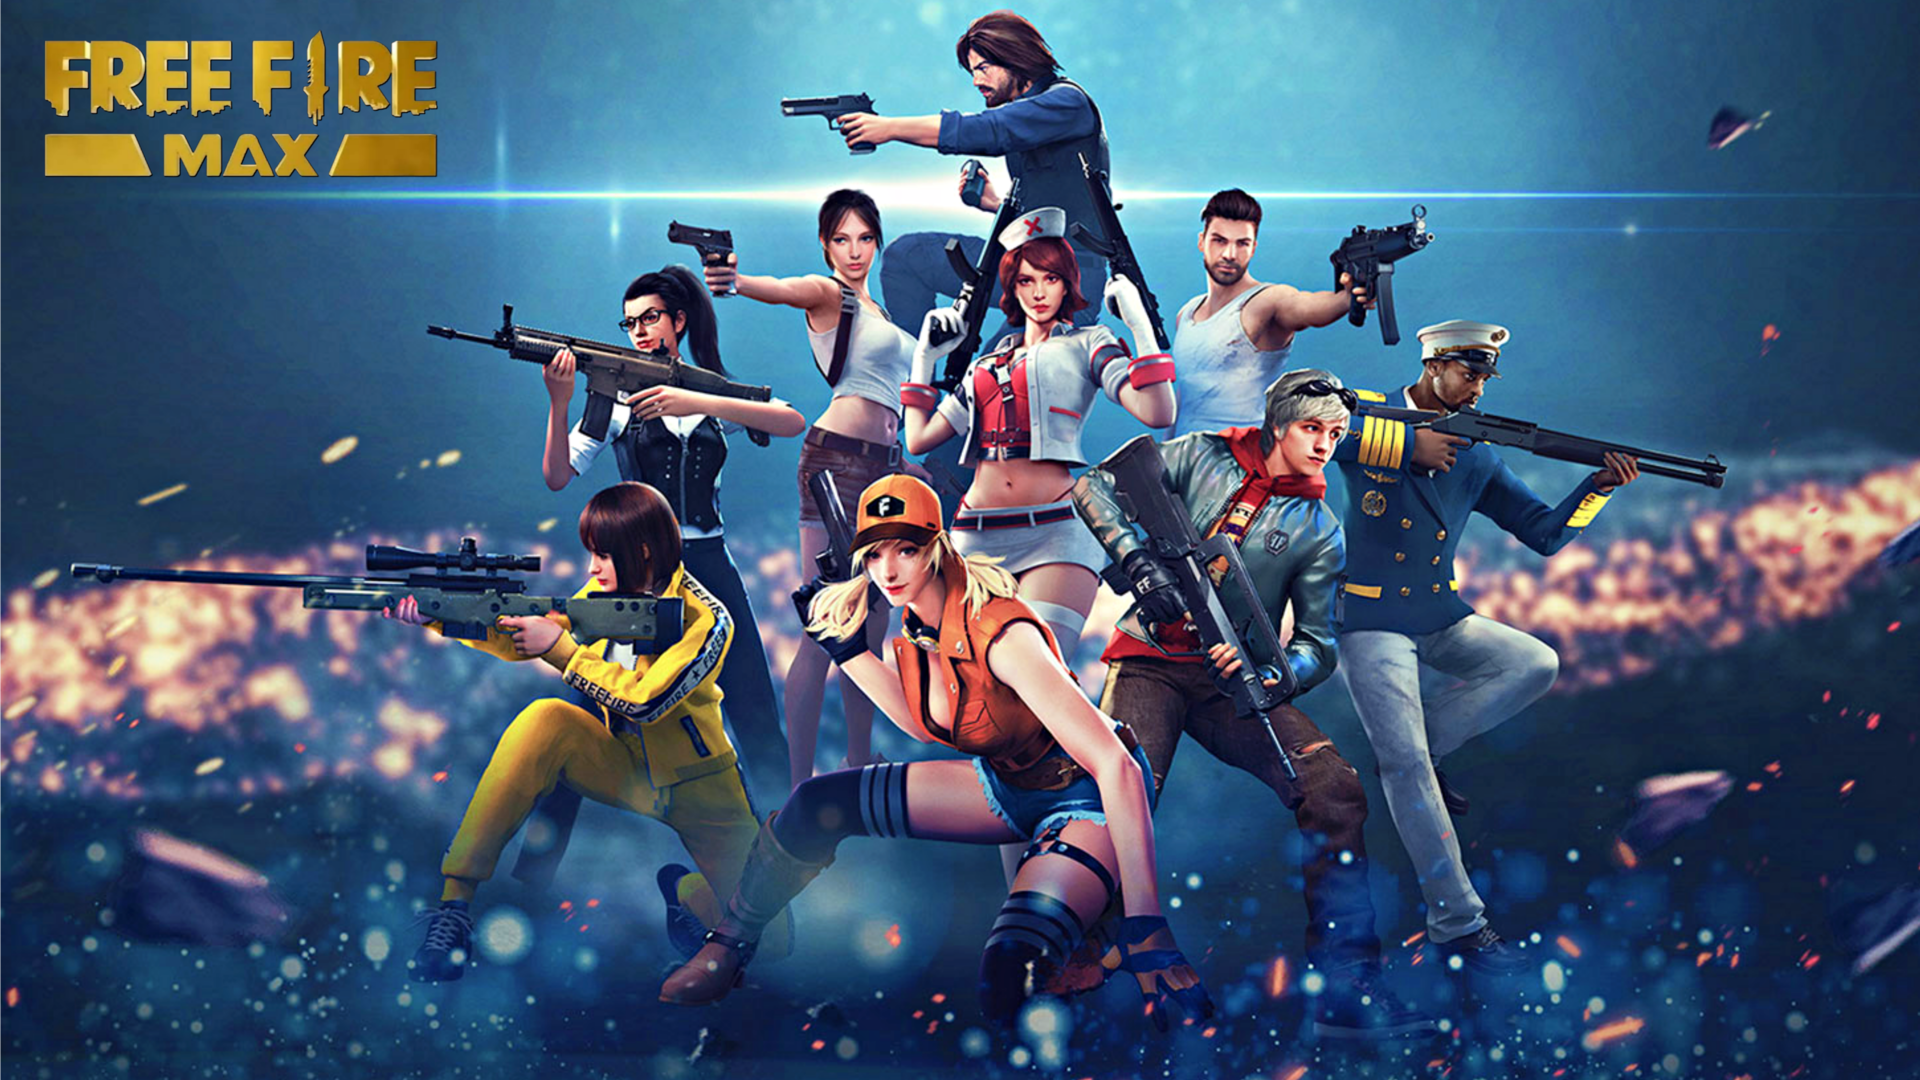 Free Fire MAX's March 11 codes: Redeem free in-game bonuses